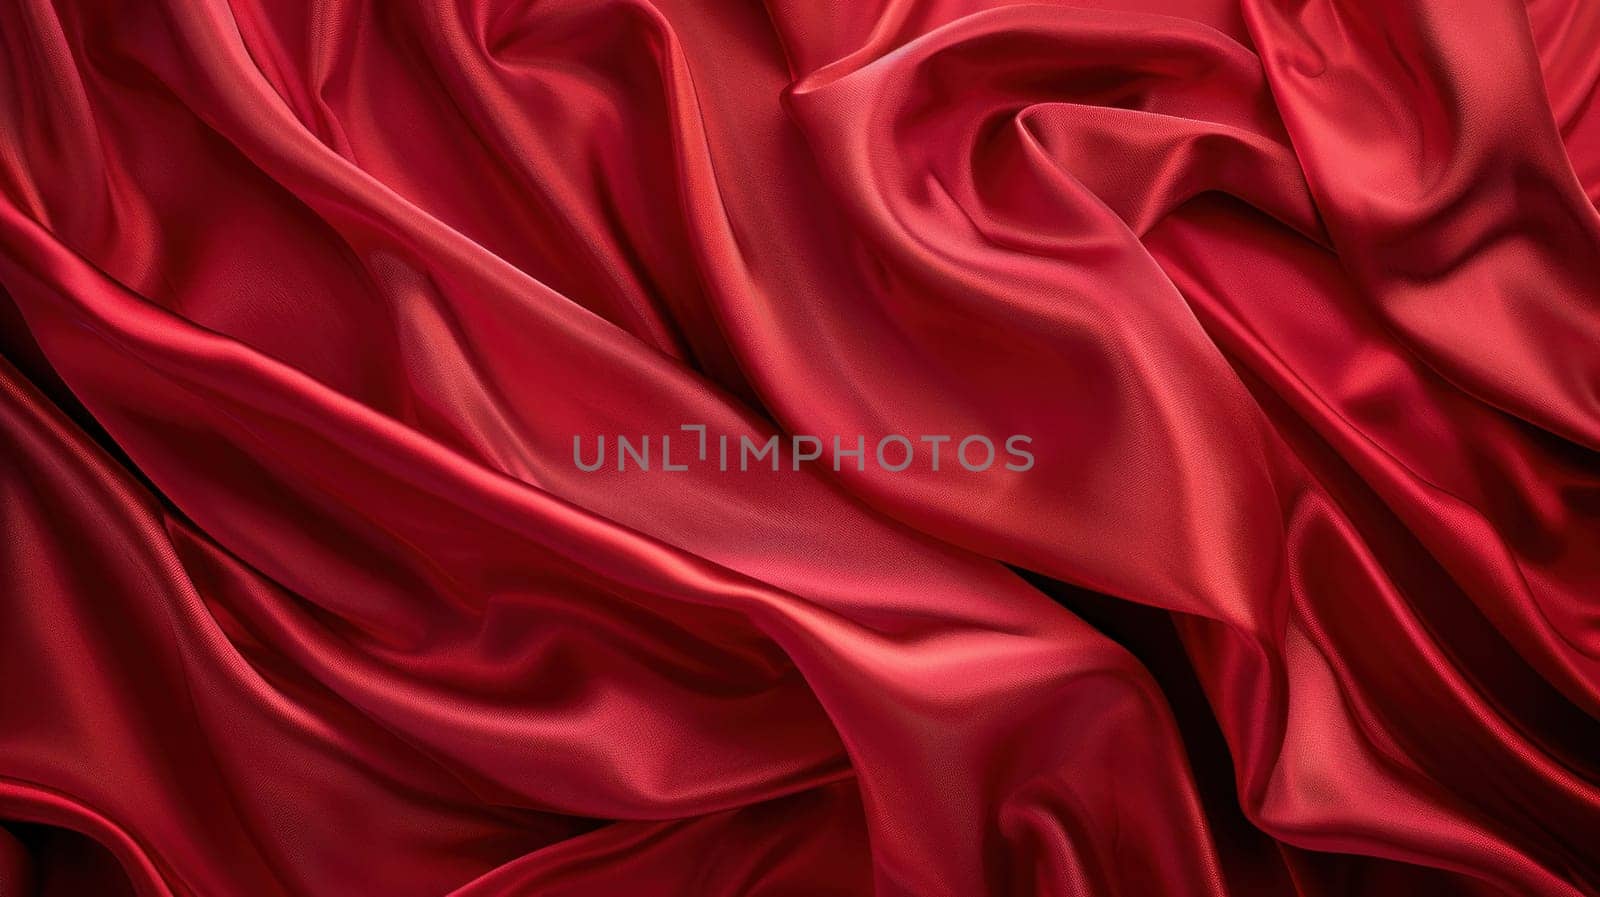 Red satin fabric with folds and pleats, textile texture close up for fashion, beauty, and art design concept